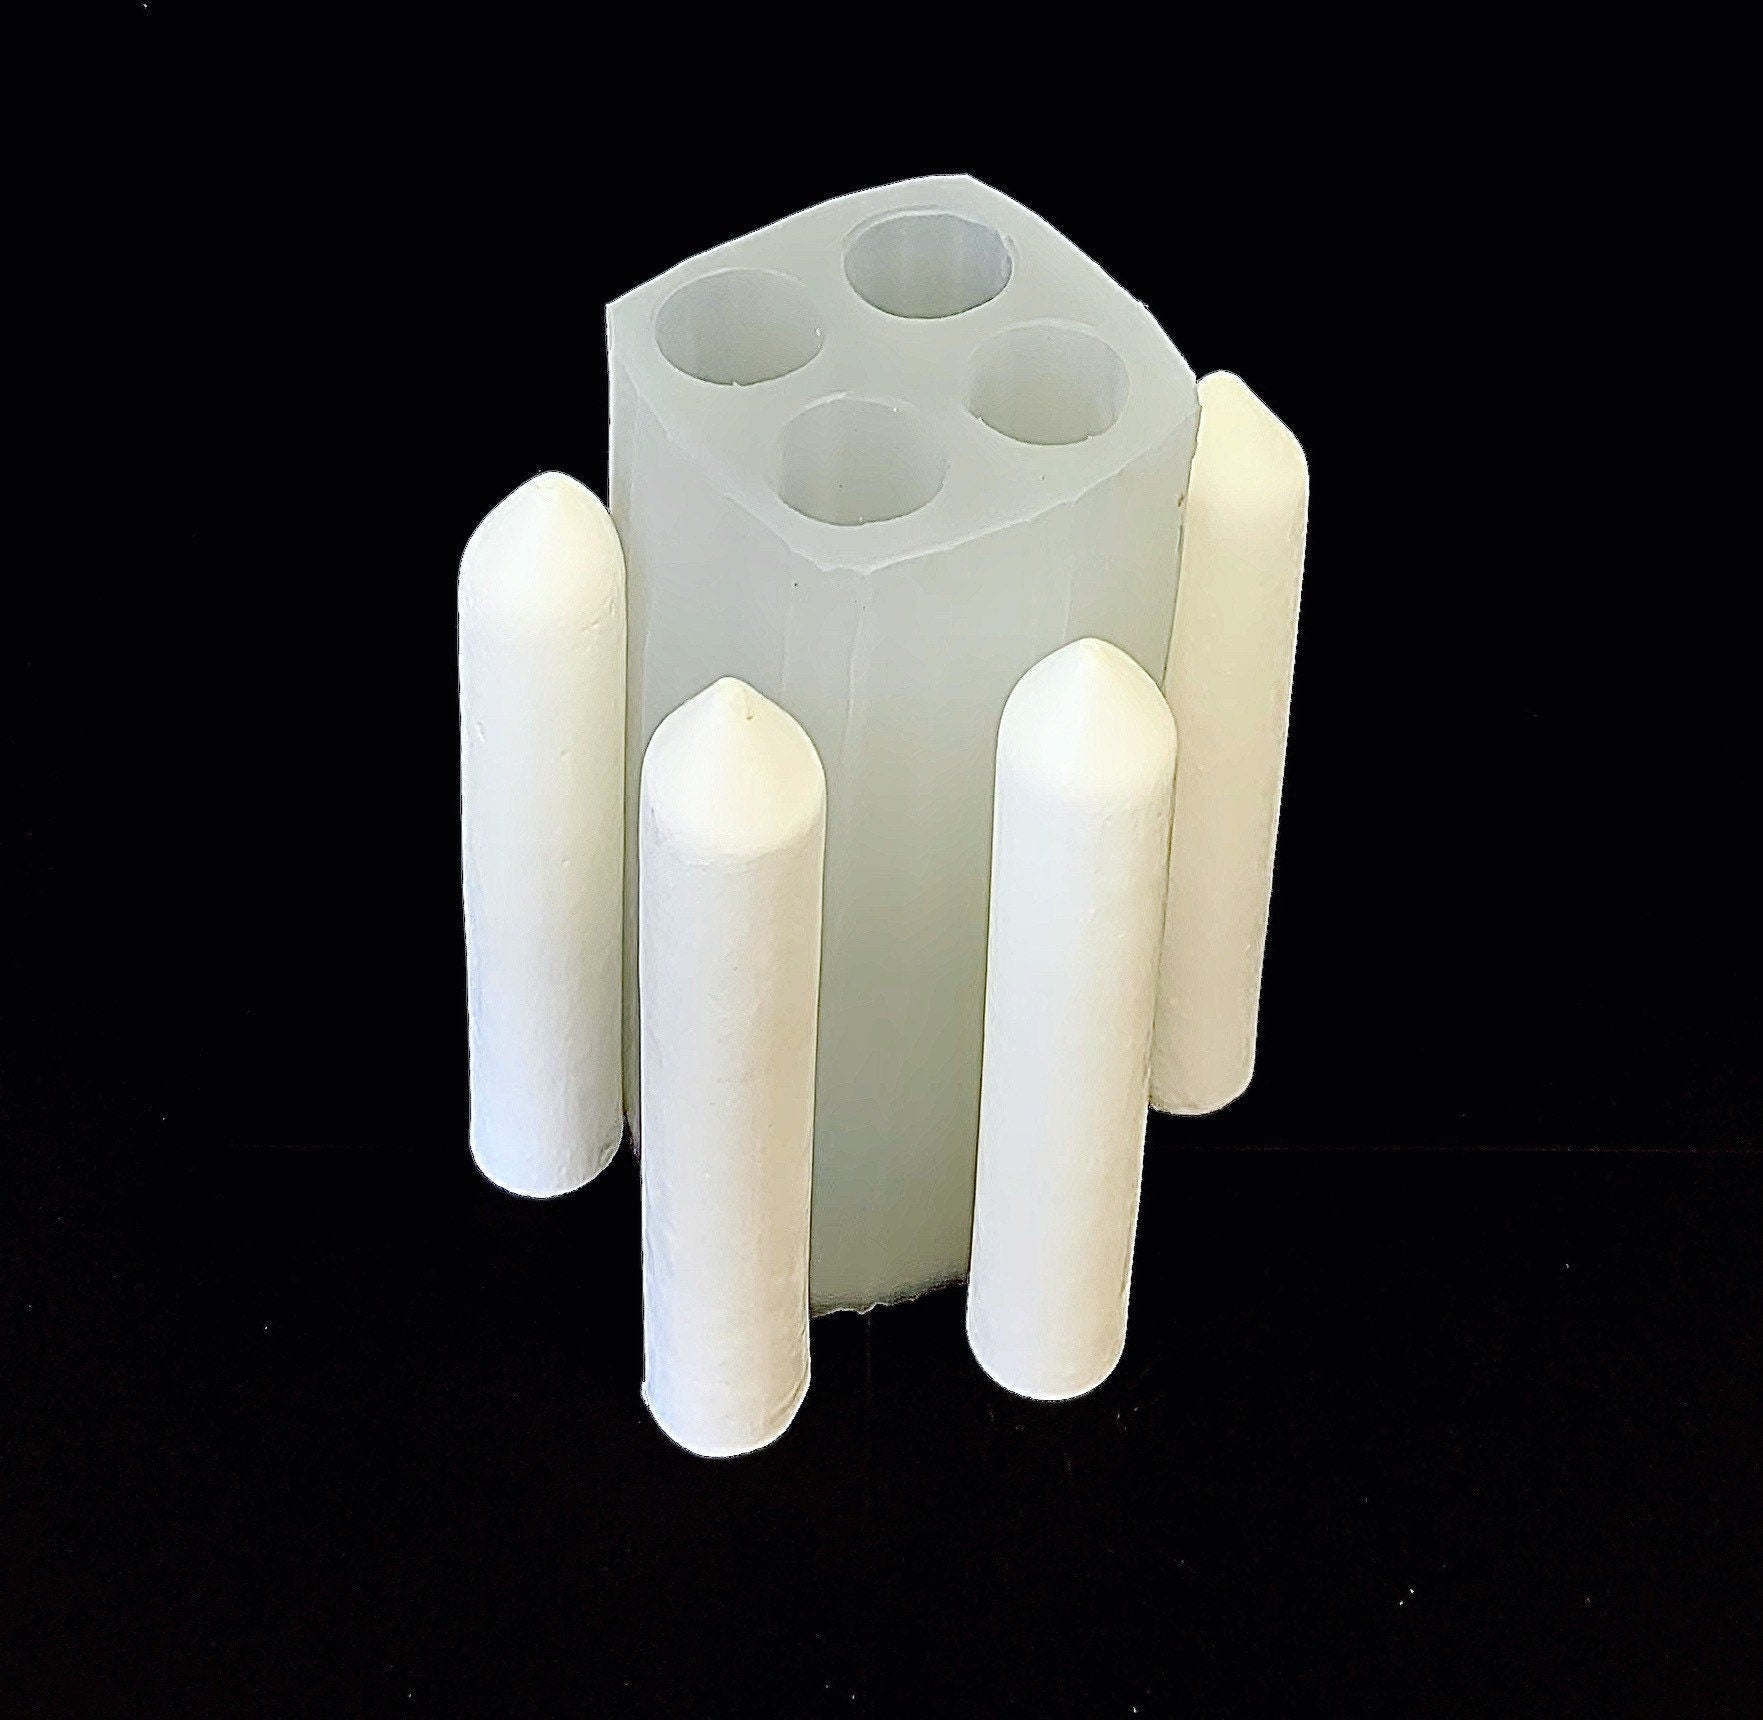 Silicone taper candle Mold - spell candle mold - 4 cavities